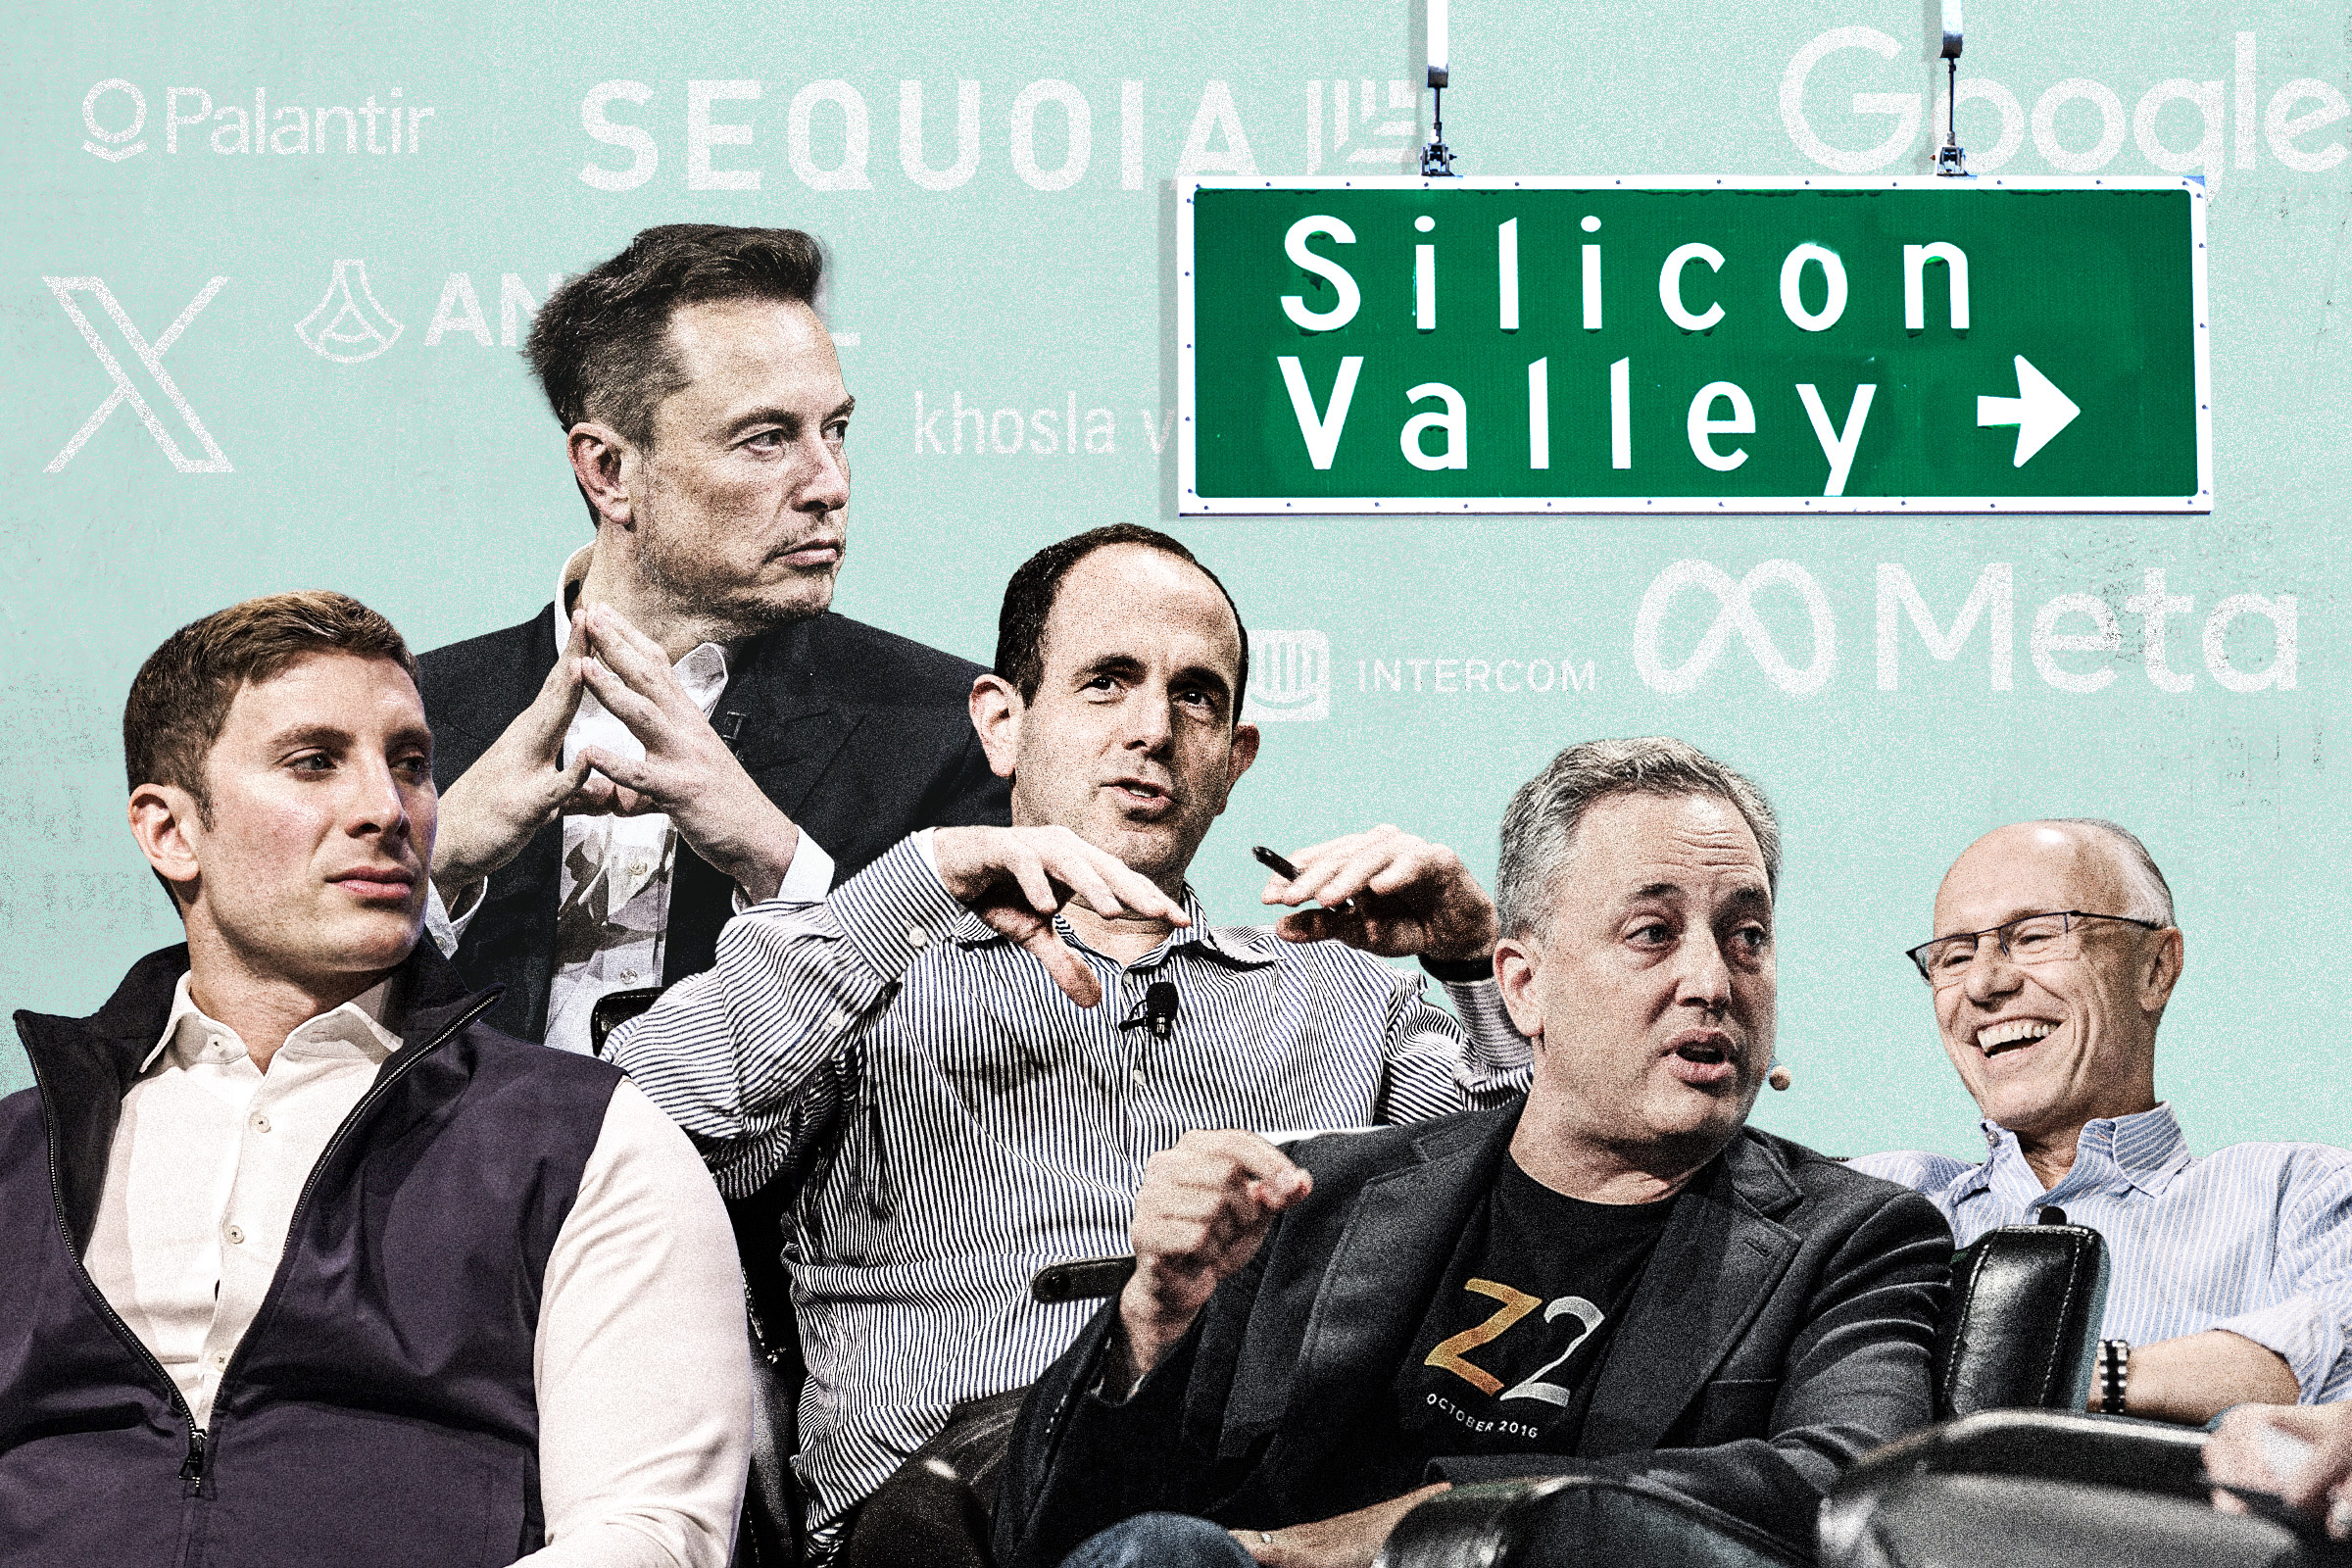 Tech Insider Explains Why Some in Silicon Valley Are Turning to Trump